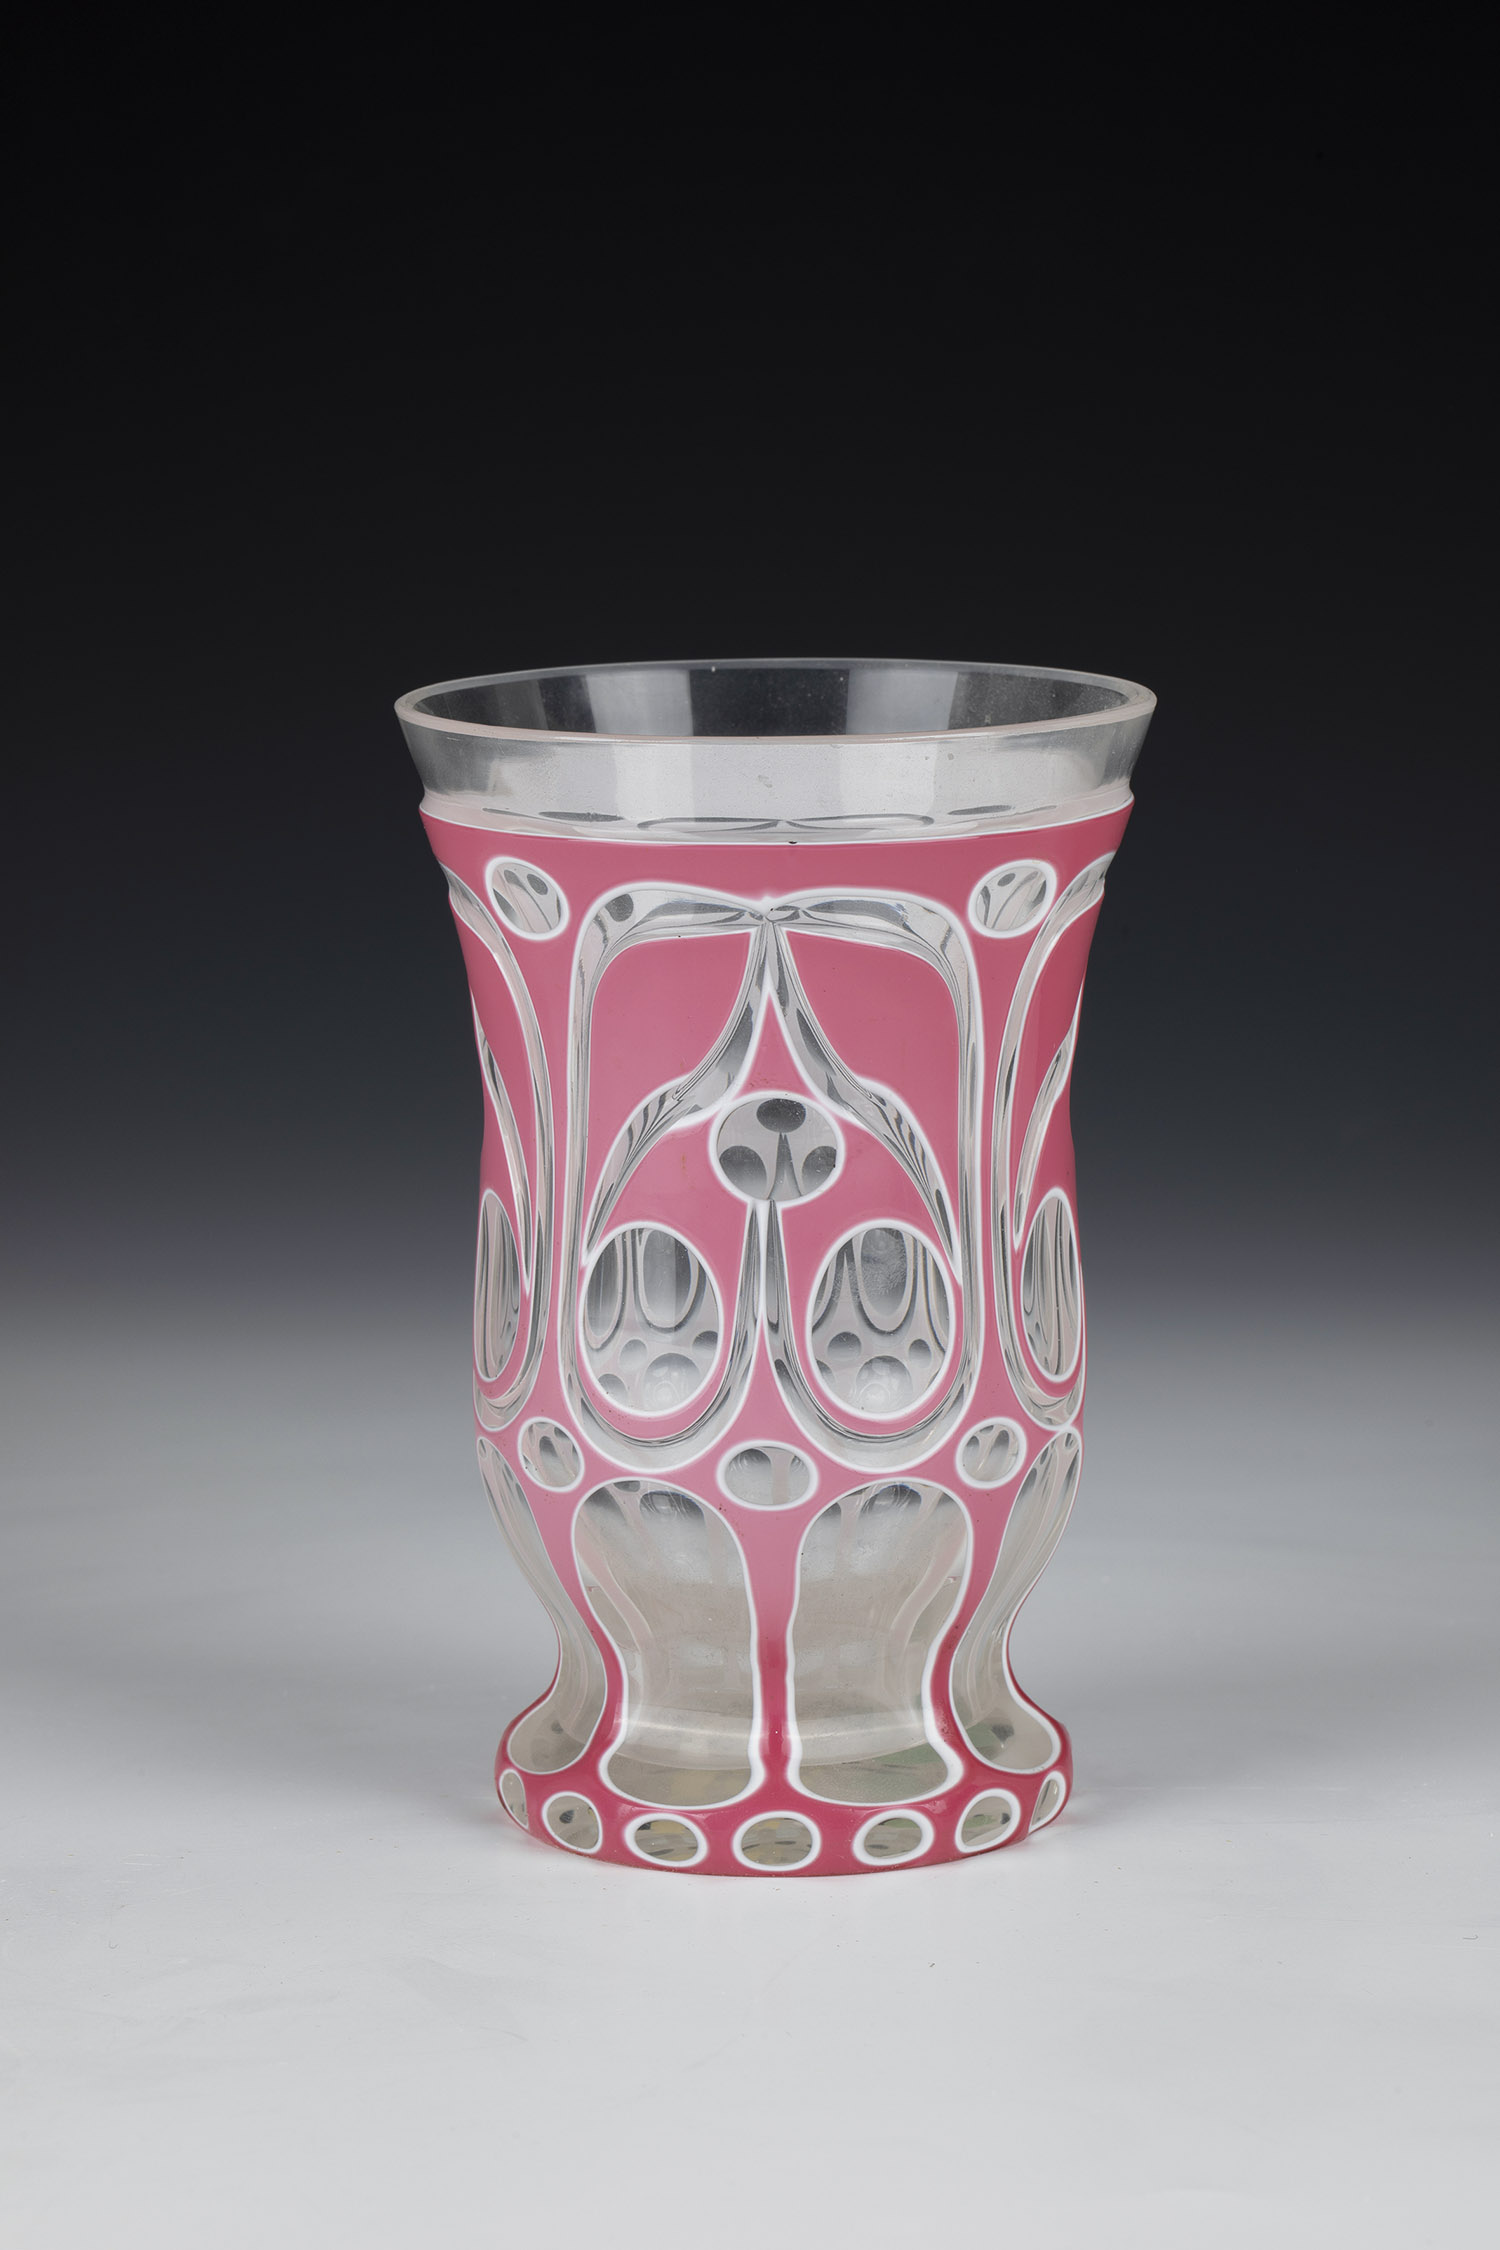 Double-cased tumbler Josephinenhuette, M. 19th century Colourless glass with pewter enamel and